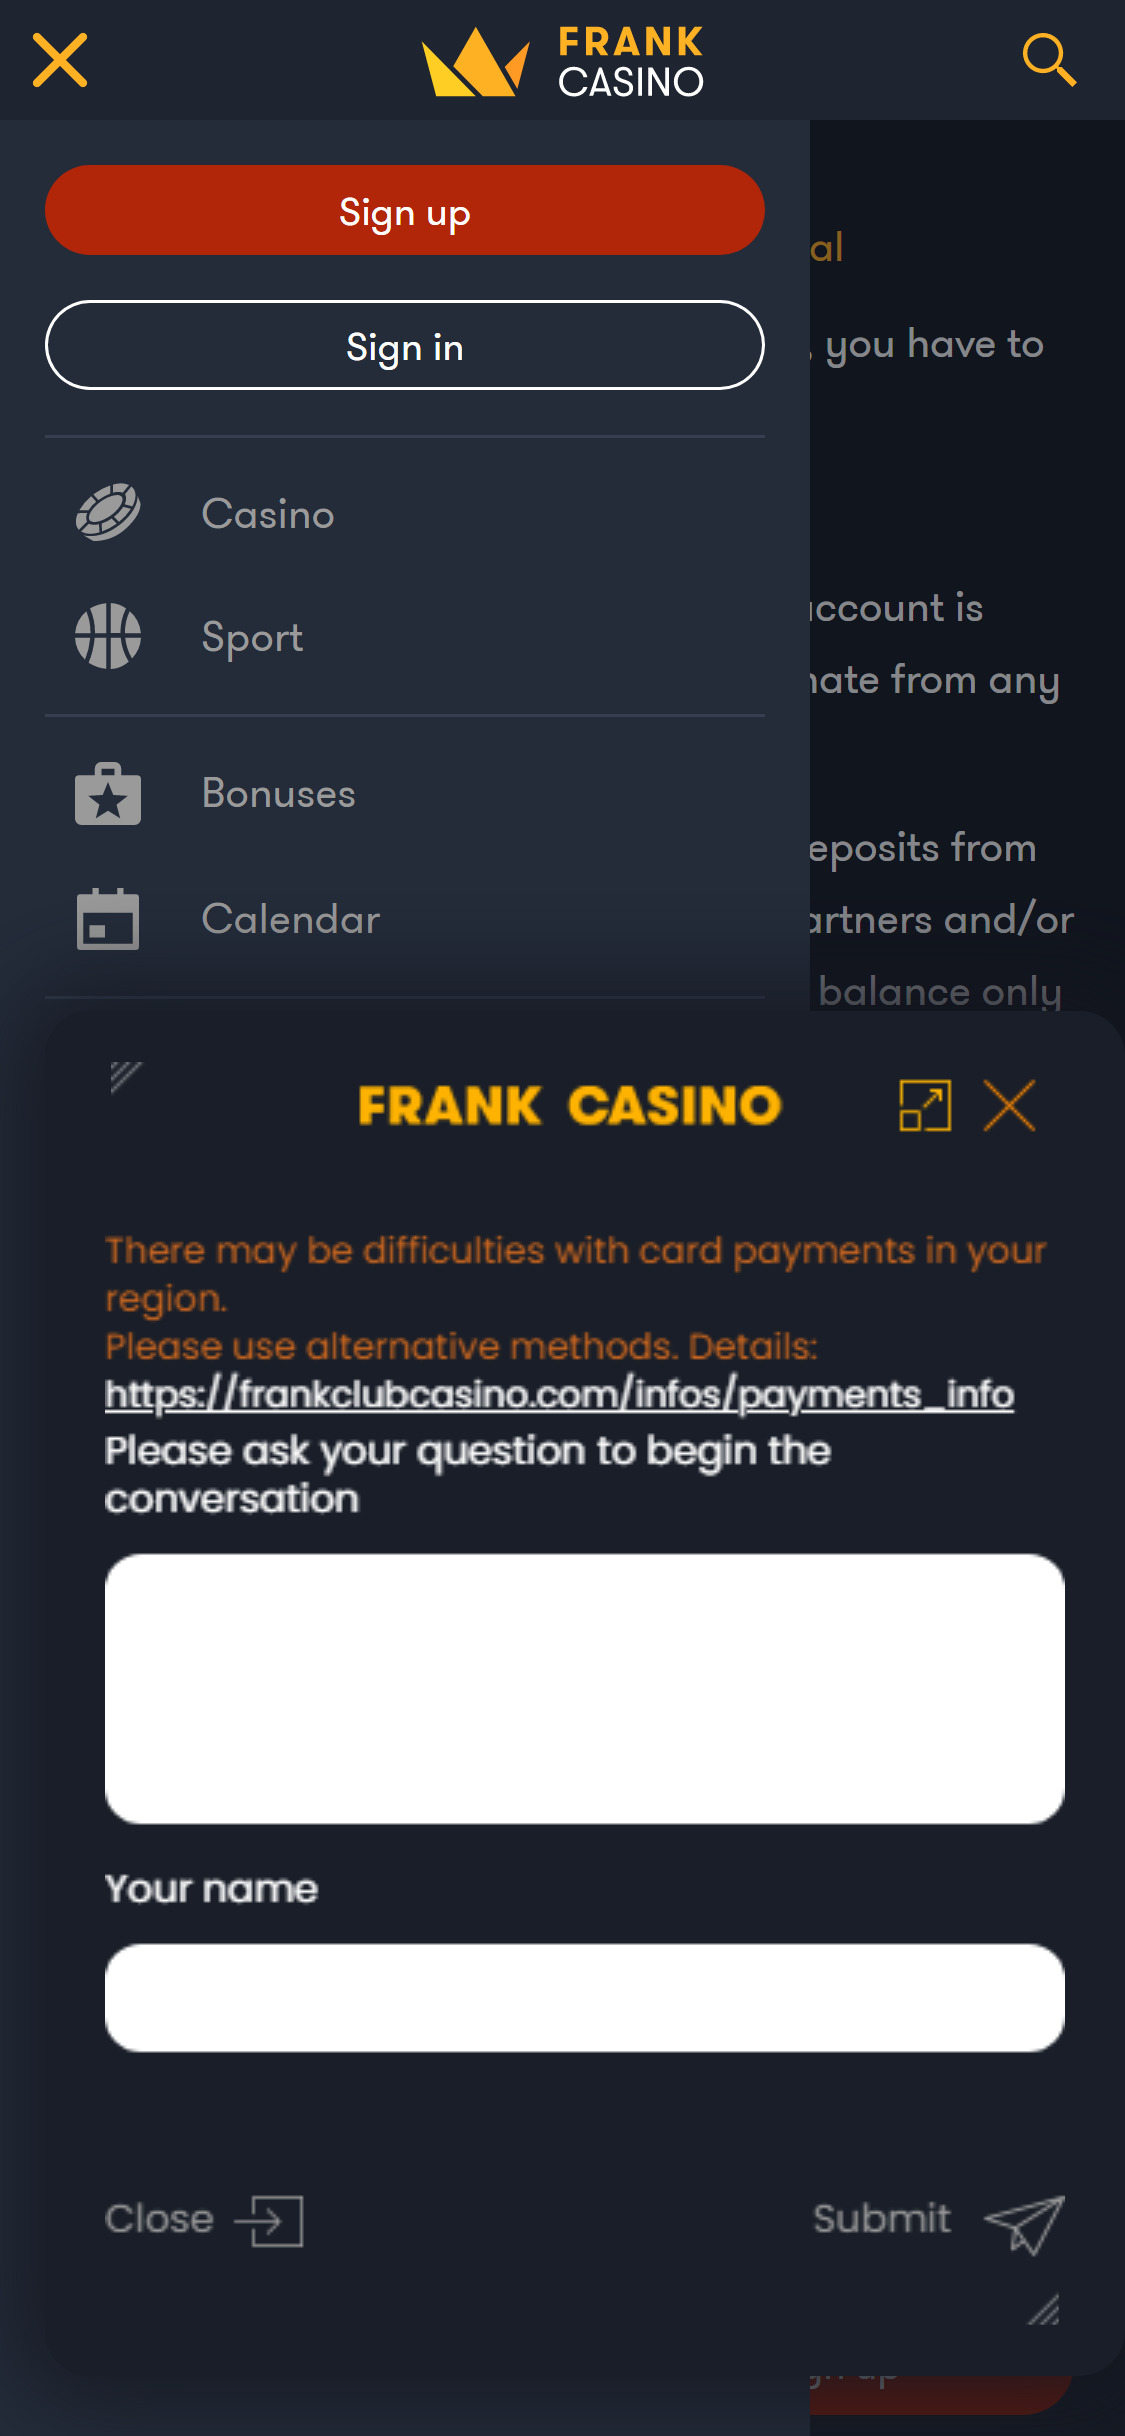 Frank Casino Mobile Support Review